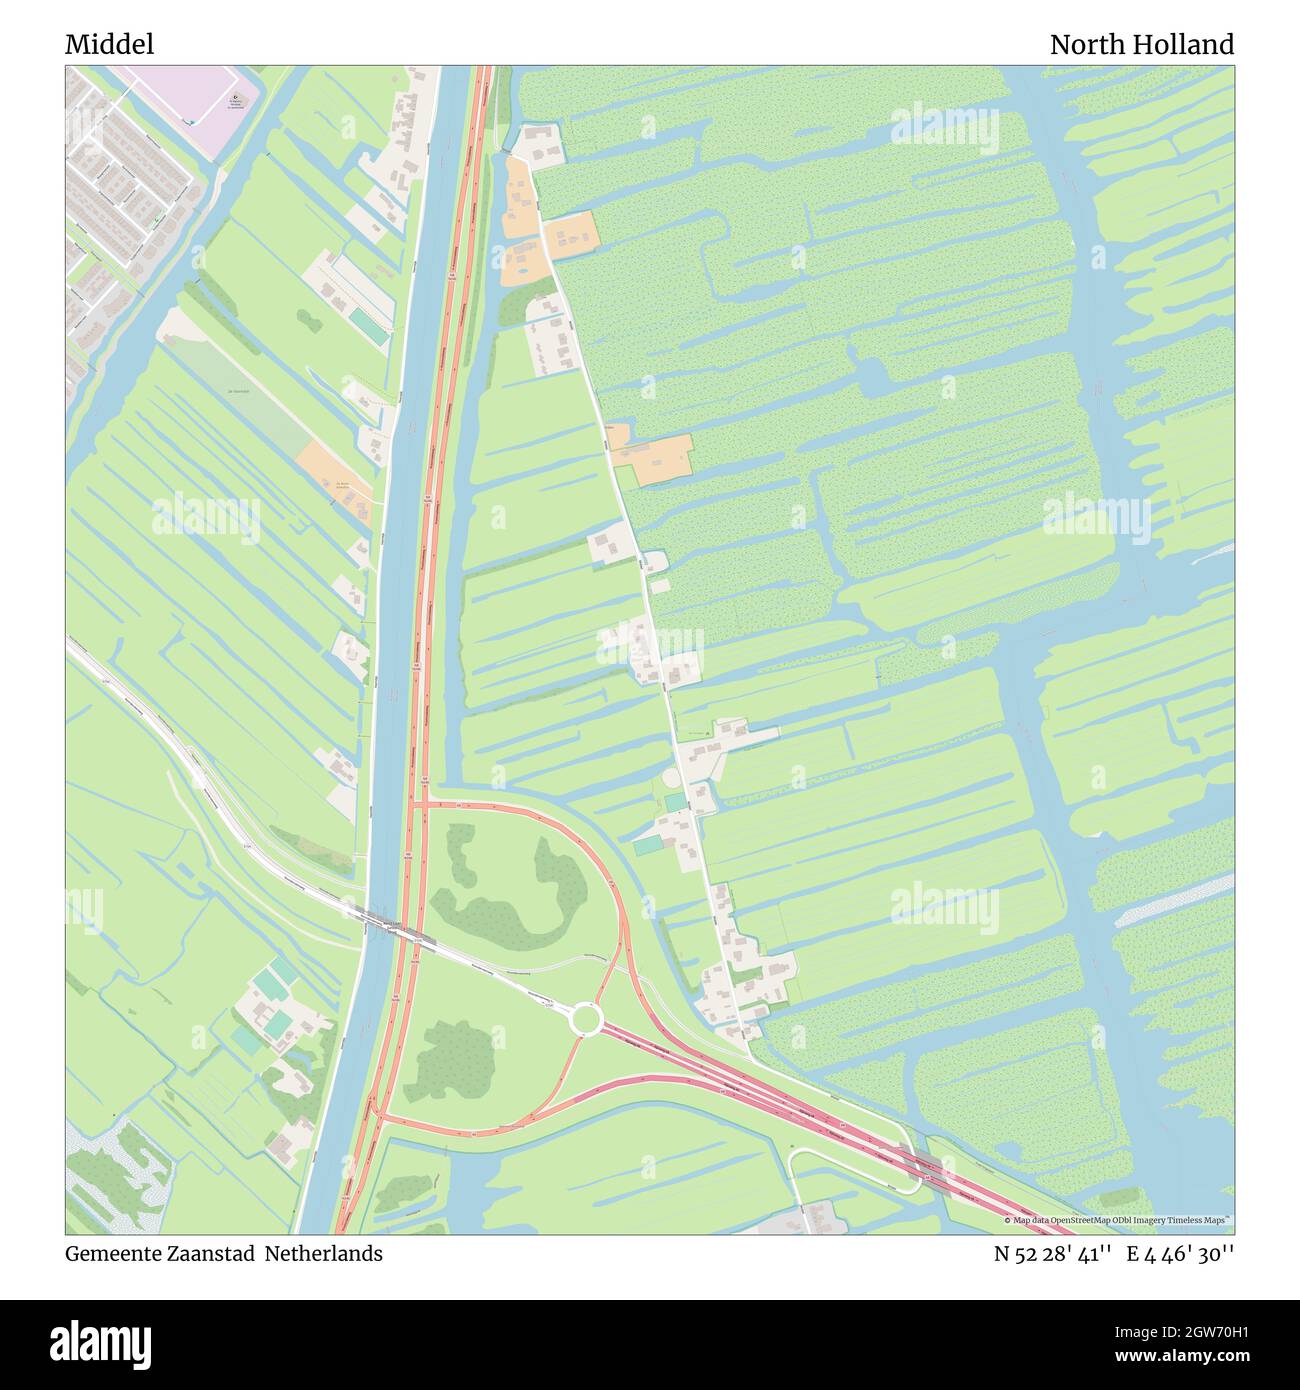 Middel, Gemeente Zaanstad, Netherlands, North Holland, N 52 28' 41'', E 4 46' 30'', map, Timeless Map published in 2021. Travelers, explorers and adventurers like Florence Nightingale, David Livingstone, Ernest Shackleton, Lewis and Clark and Sherlock Holmes relied on maps to plan travels to the world's most remote corners, Timeless Maps is mapping most locations on the globe, showing the achievement of great dreams Stock Photo